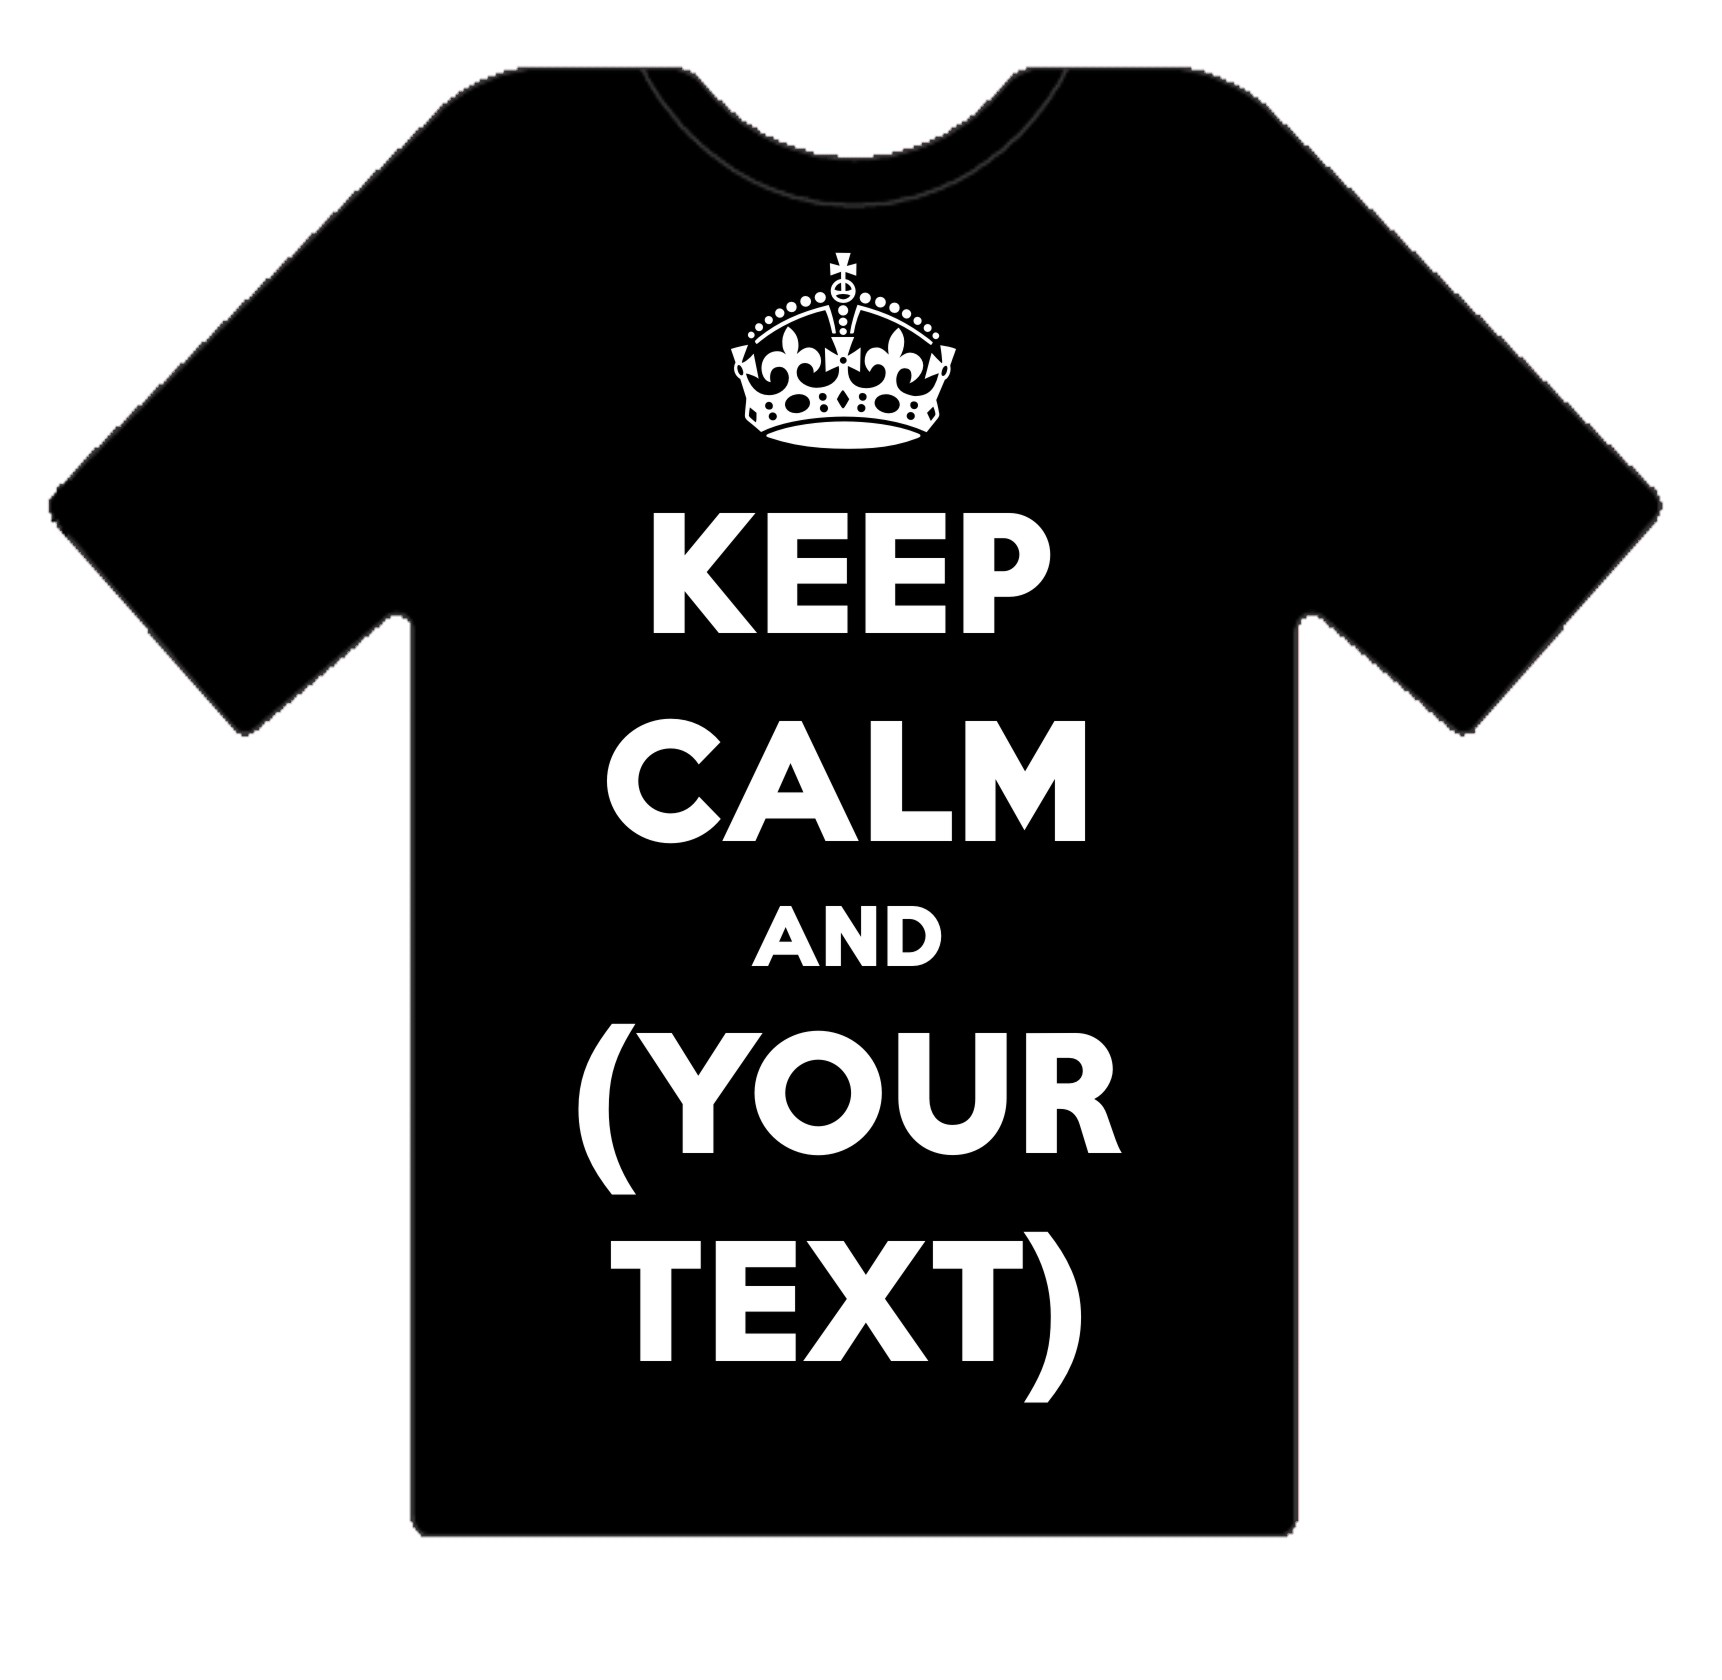 KEEP CALM AND- YOUR CUSTOM PERSONALISED DESIGN TEXT -ON A T-SHIRT - MENS | eBay